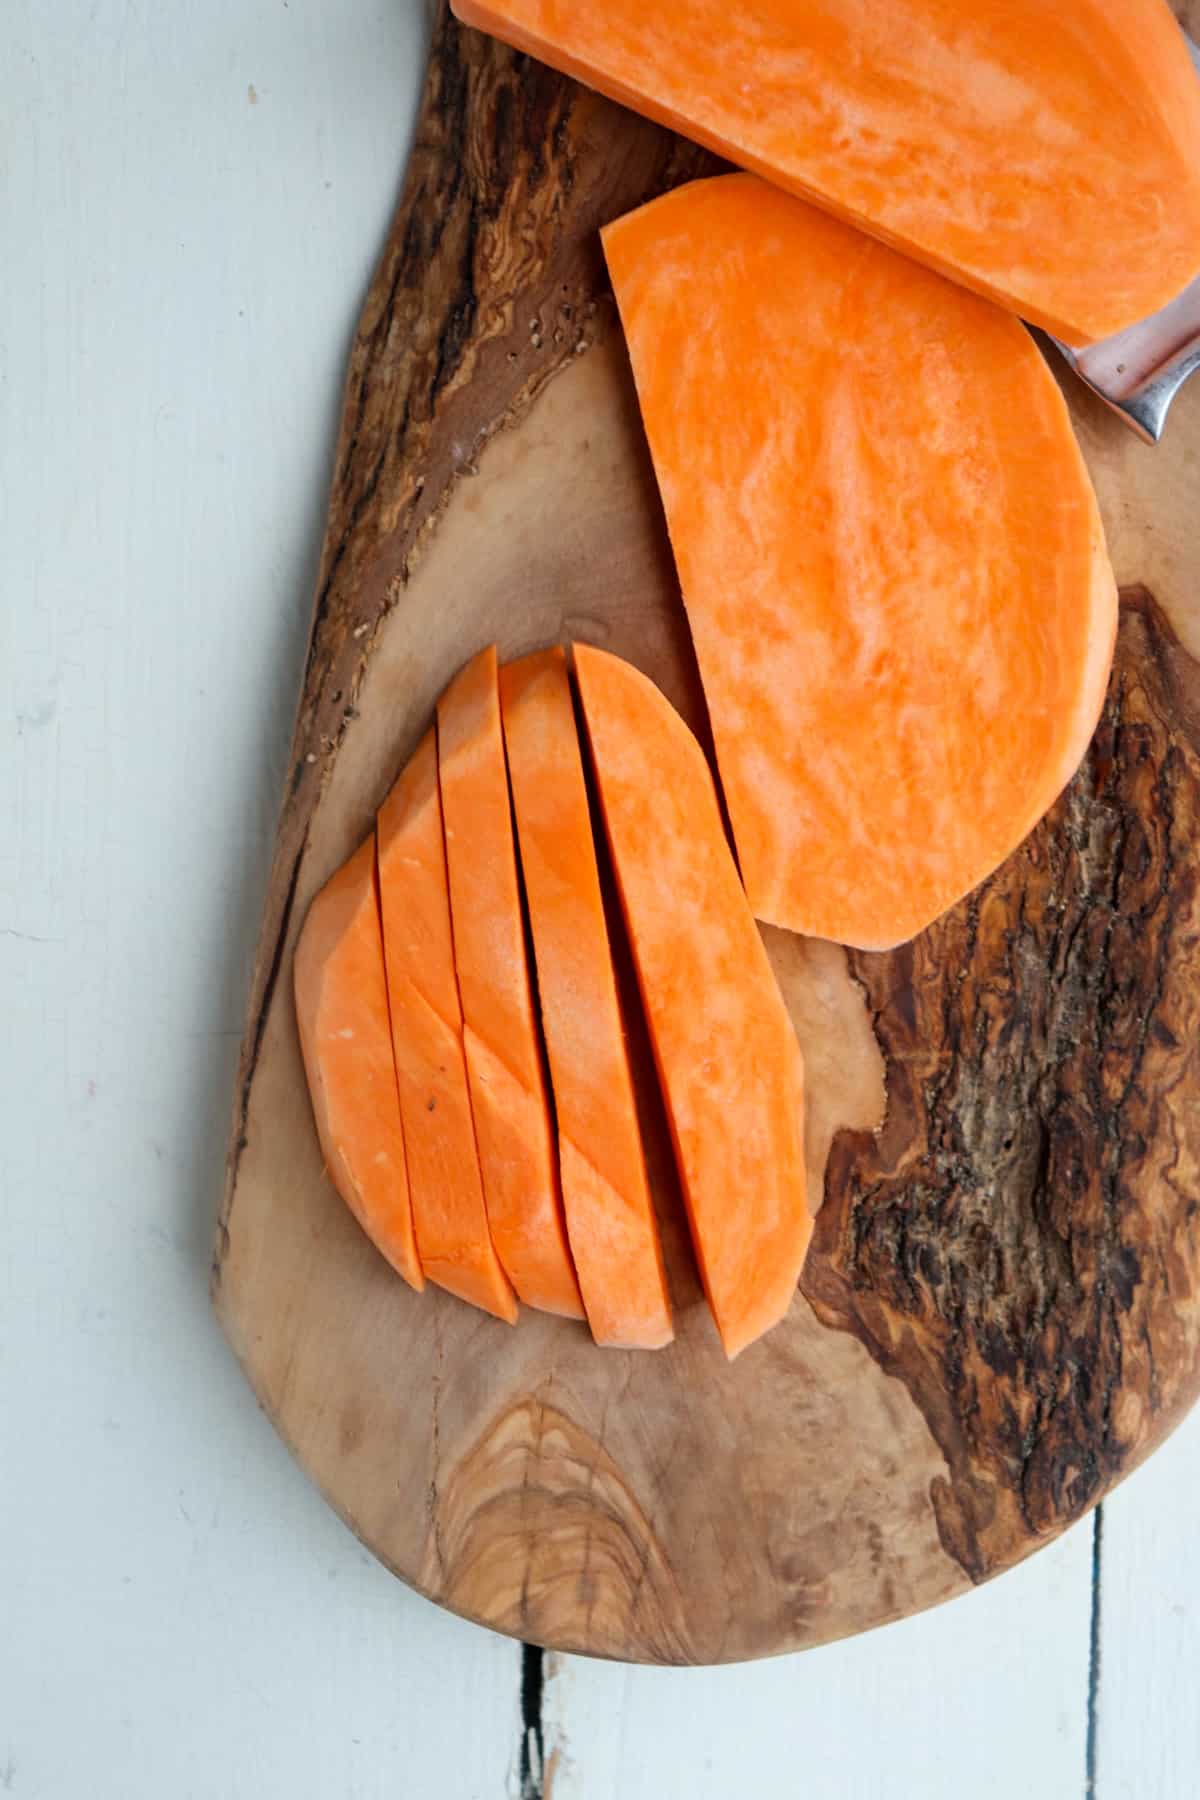 sweet potatoes being sliced into matchsticks on a wooden board.